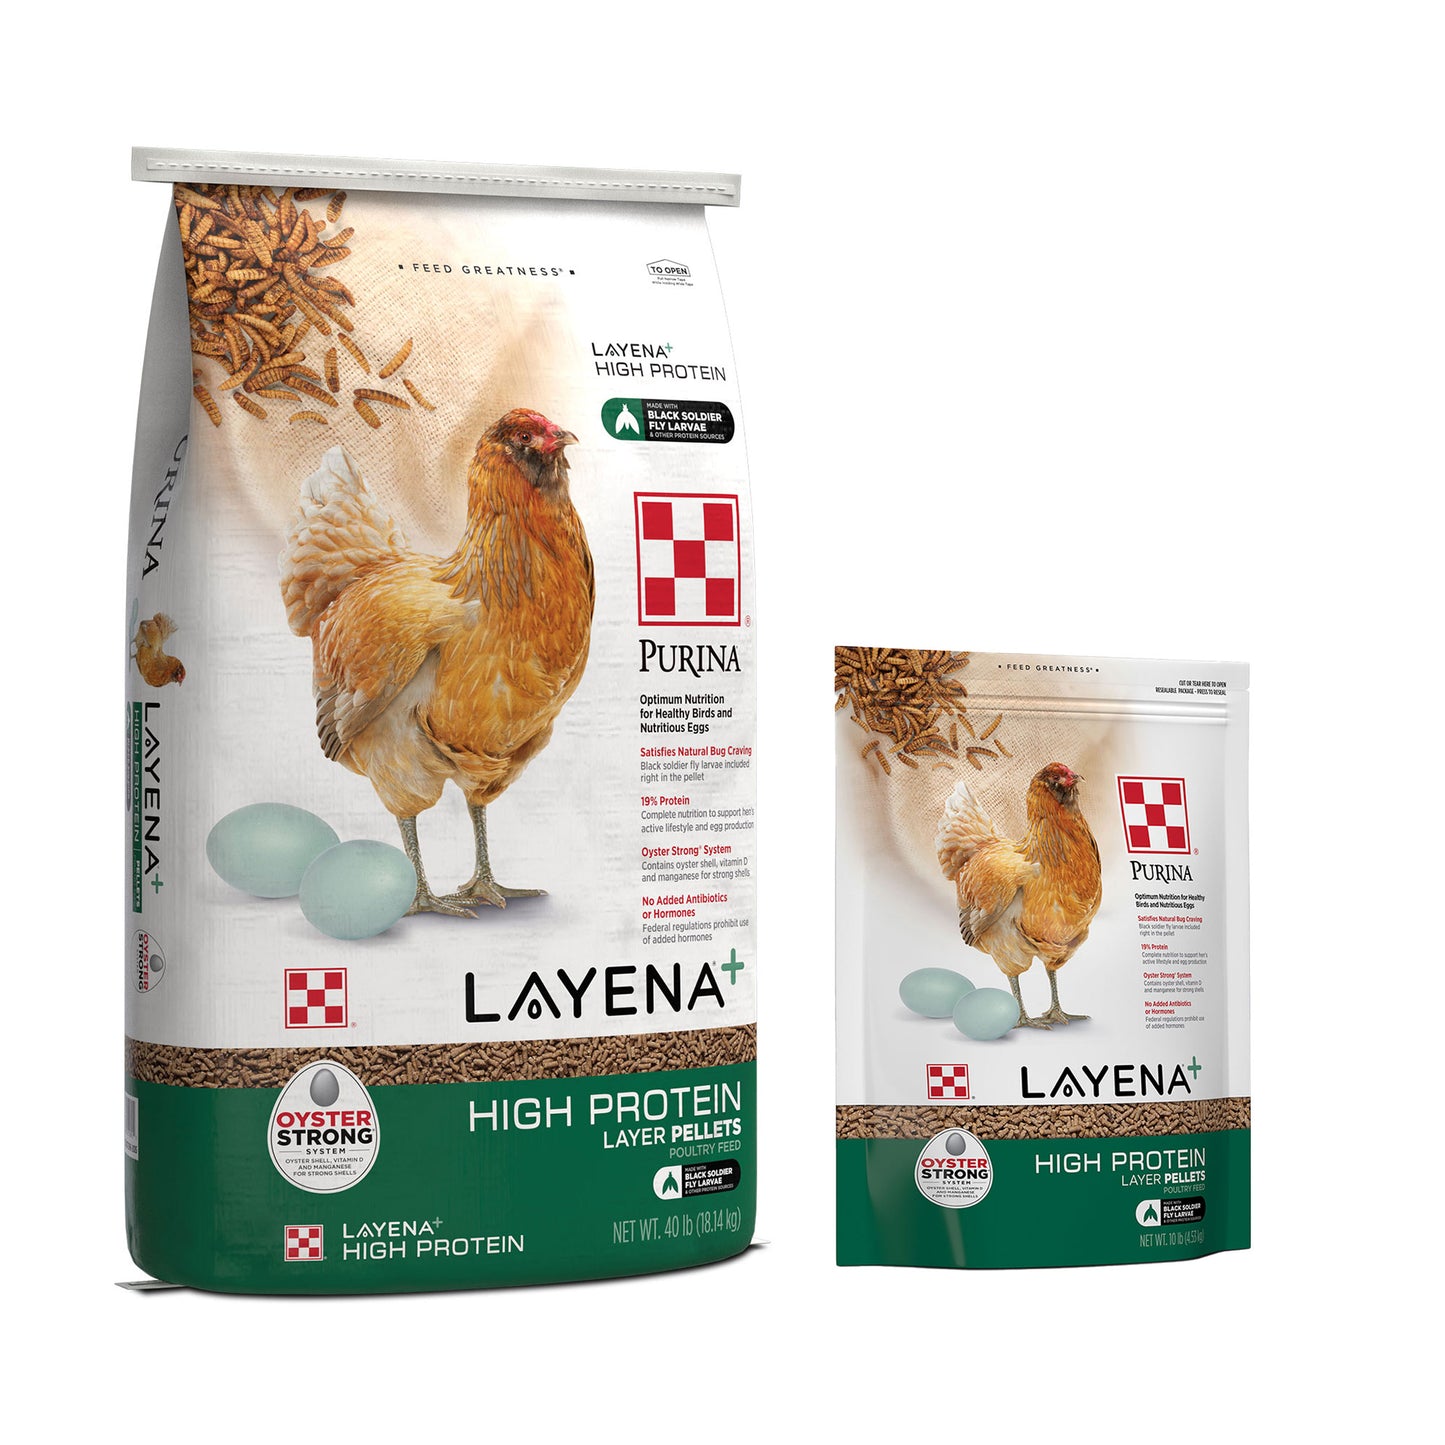 Purina Layena High Protein 40 Pound Bag and 10 Pound Pouch grouped together